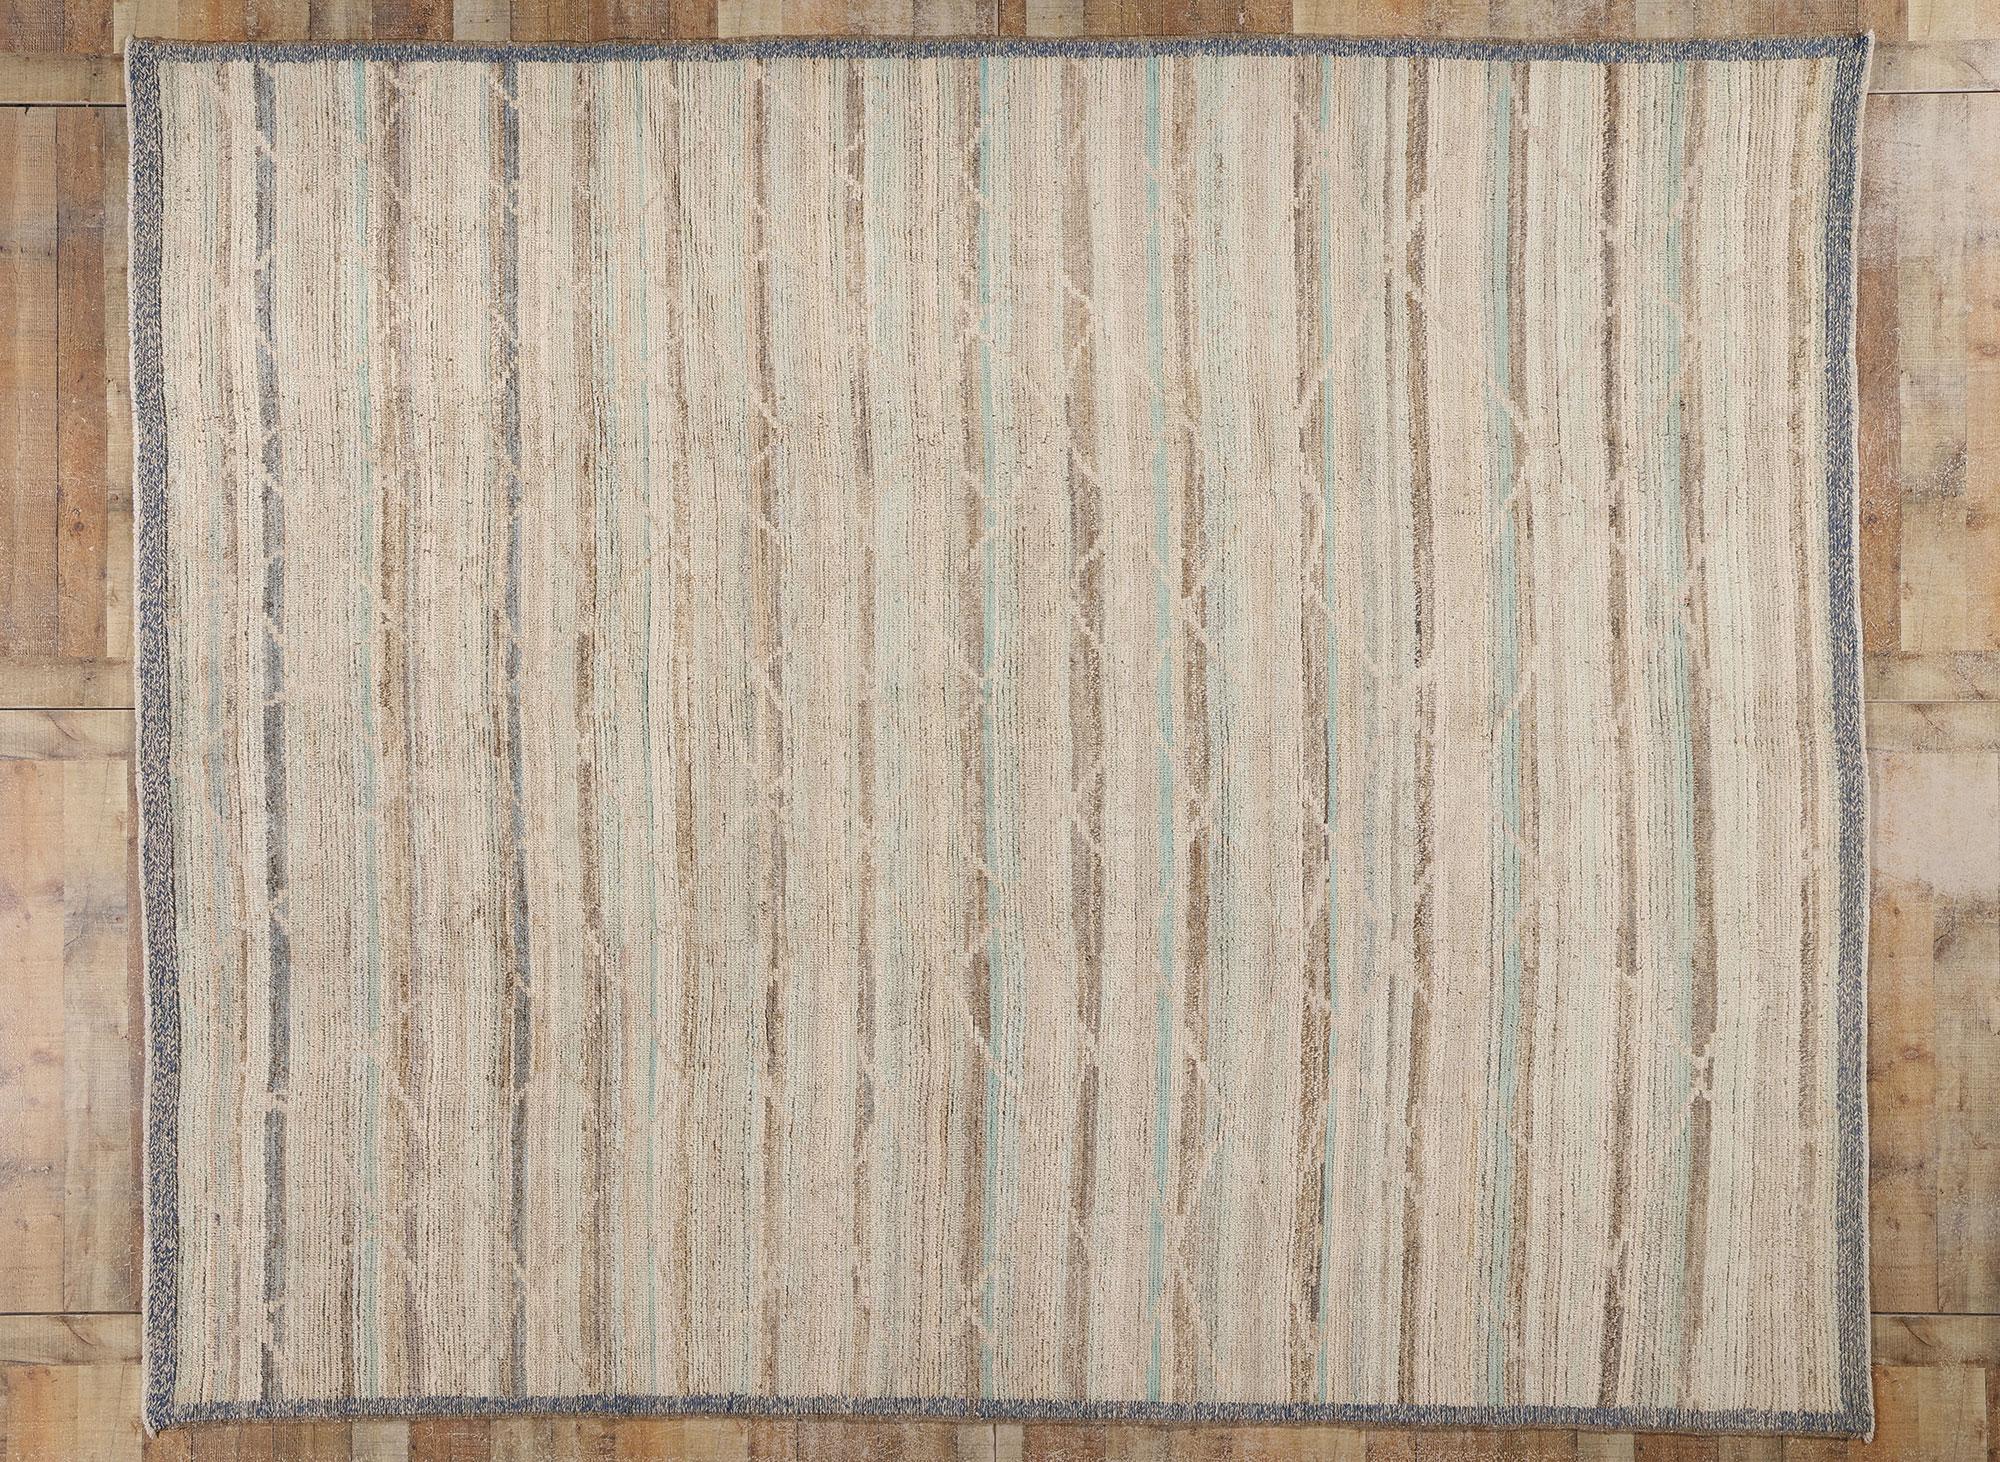 81078 Modern Boho Tonal Striped Moroccan Rug, 09'03 x 11'05. Step into a realm of modern enchantment with our hand knotted wool Modern Boho striped Moroccan rug, a masterpiece of design blending timeless allure with contemporary flair. Inspired by